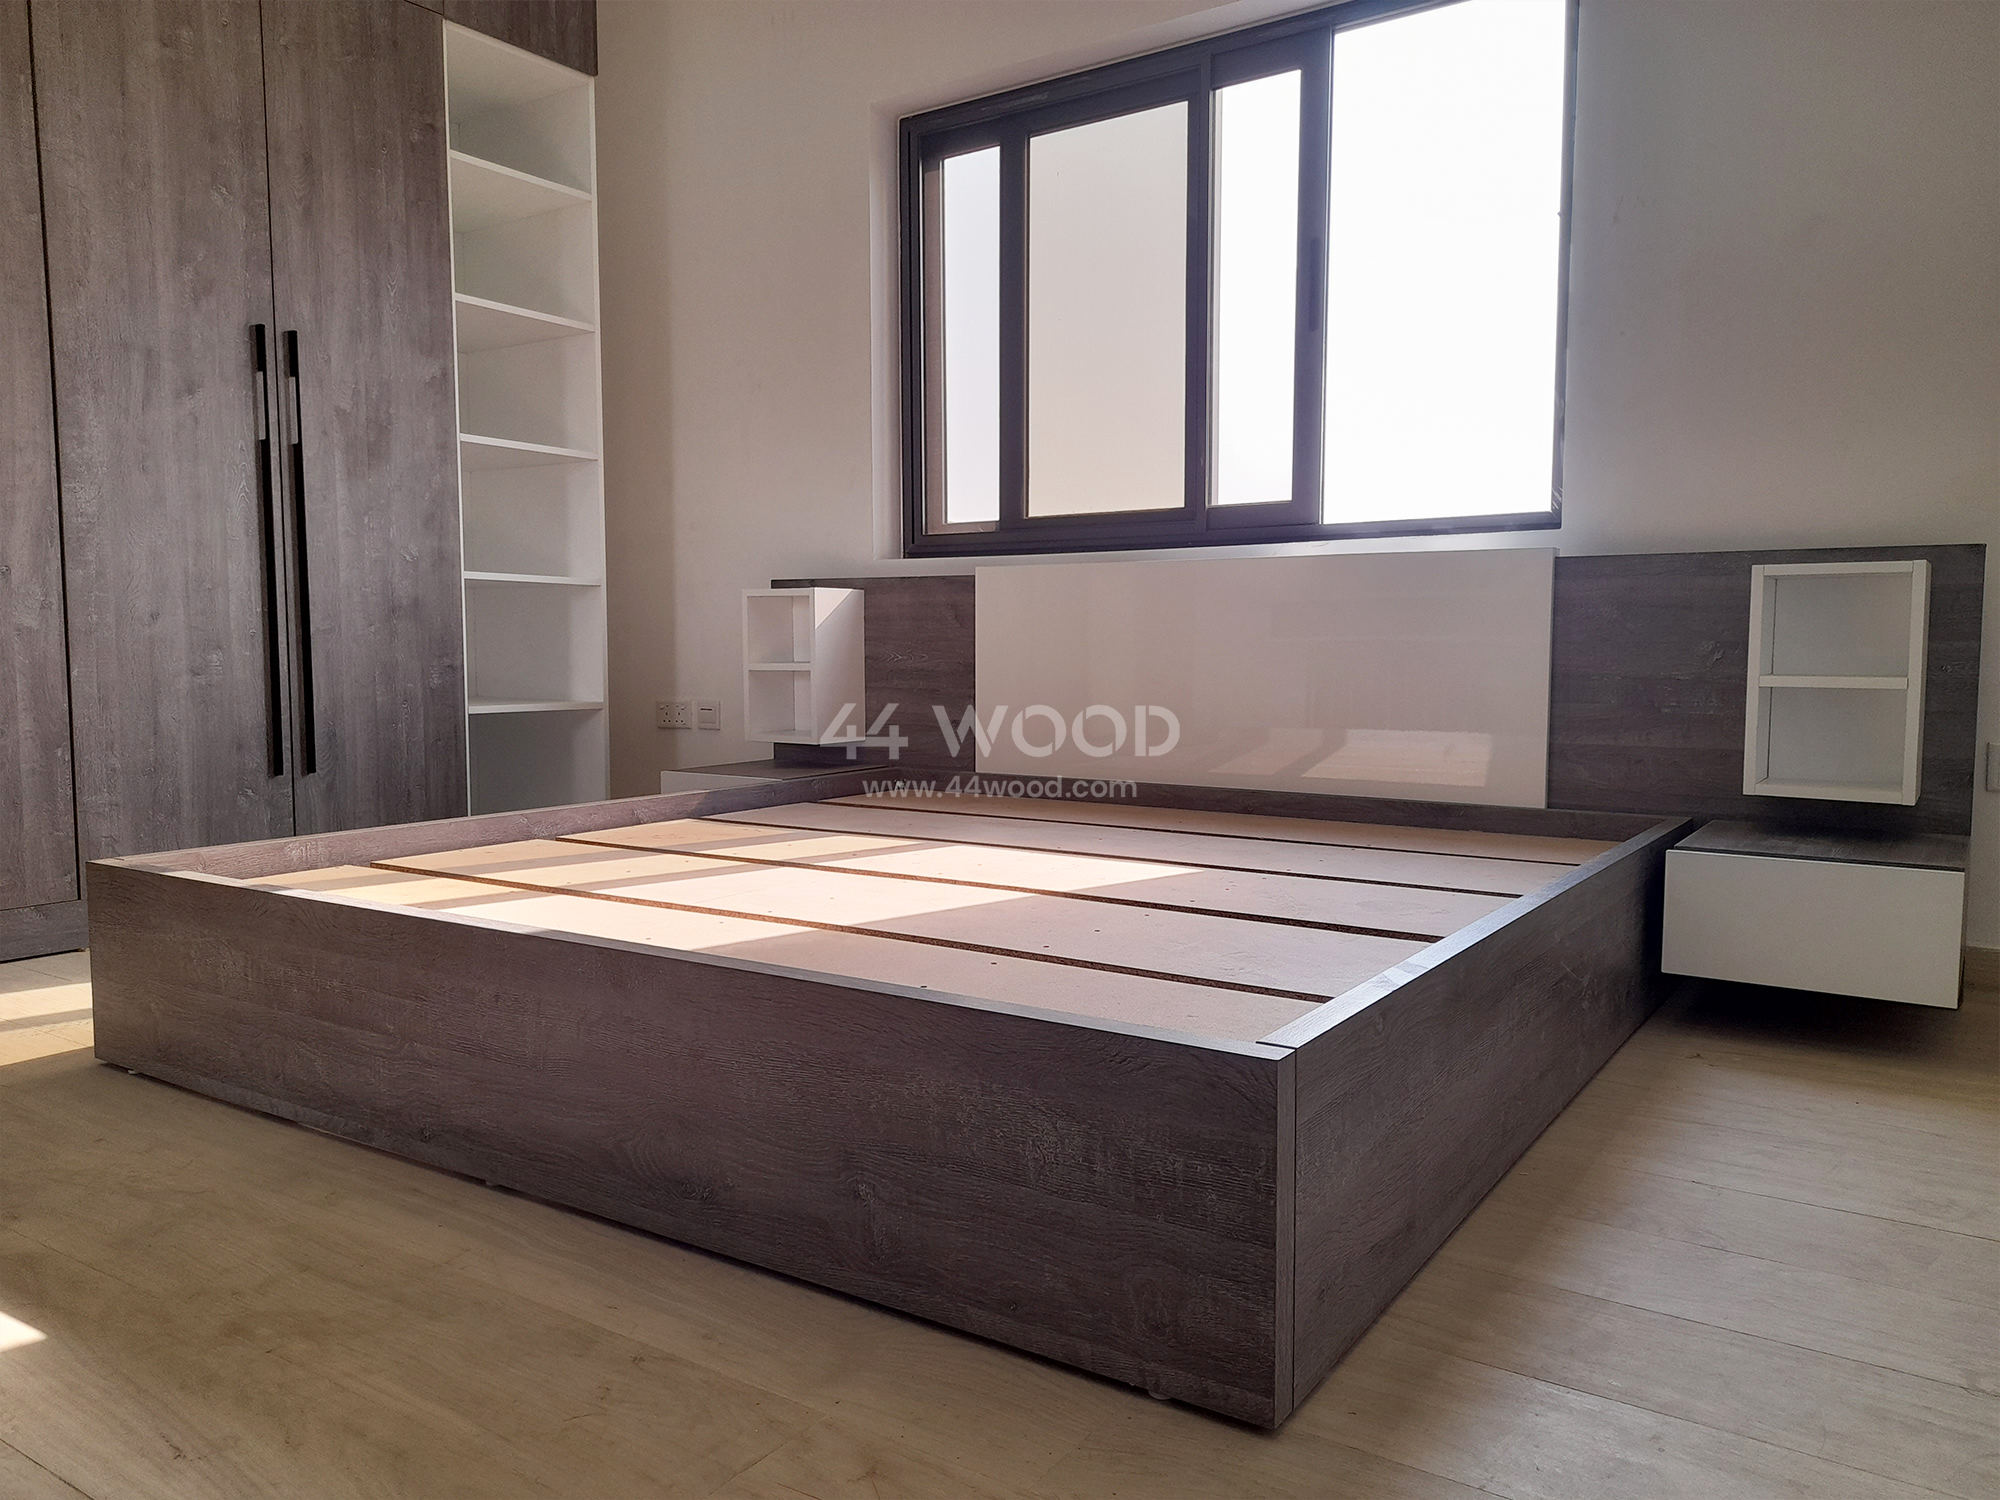 44-wood-bed4